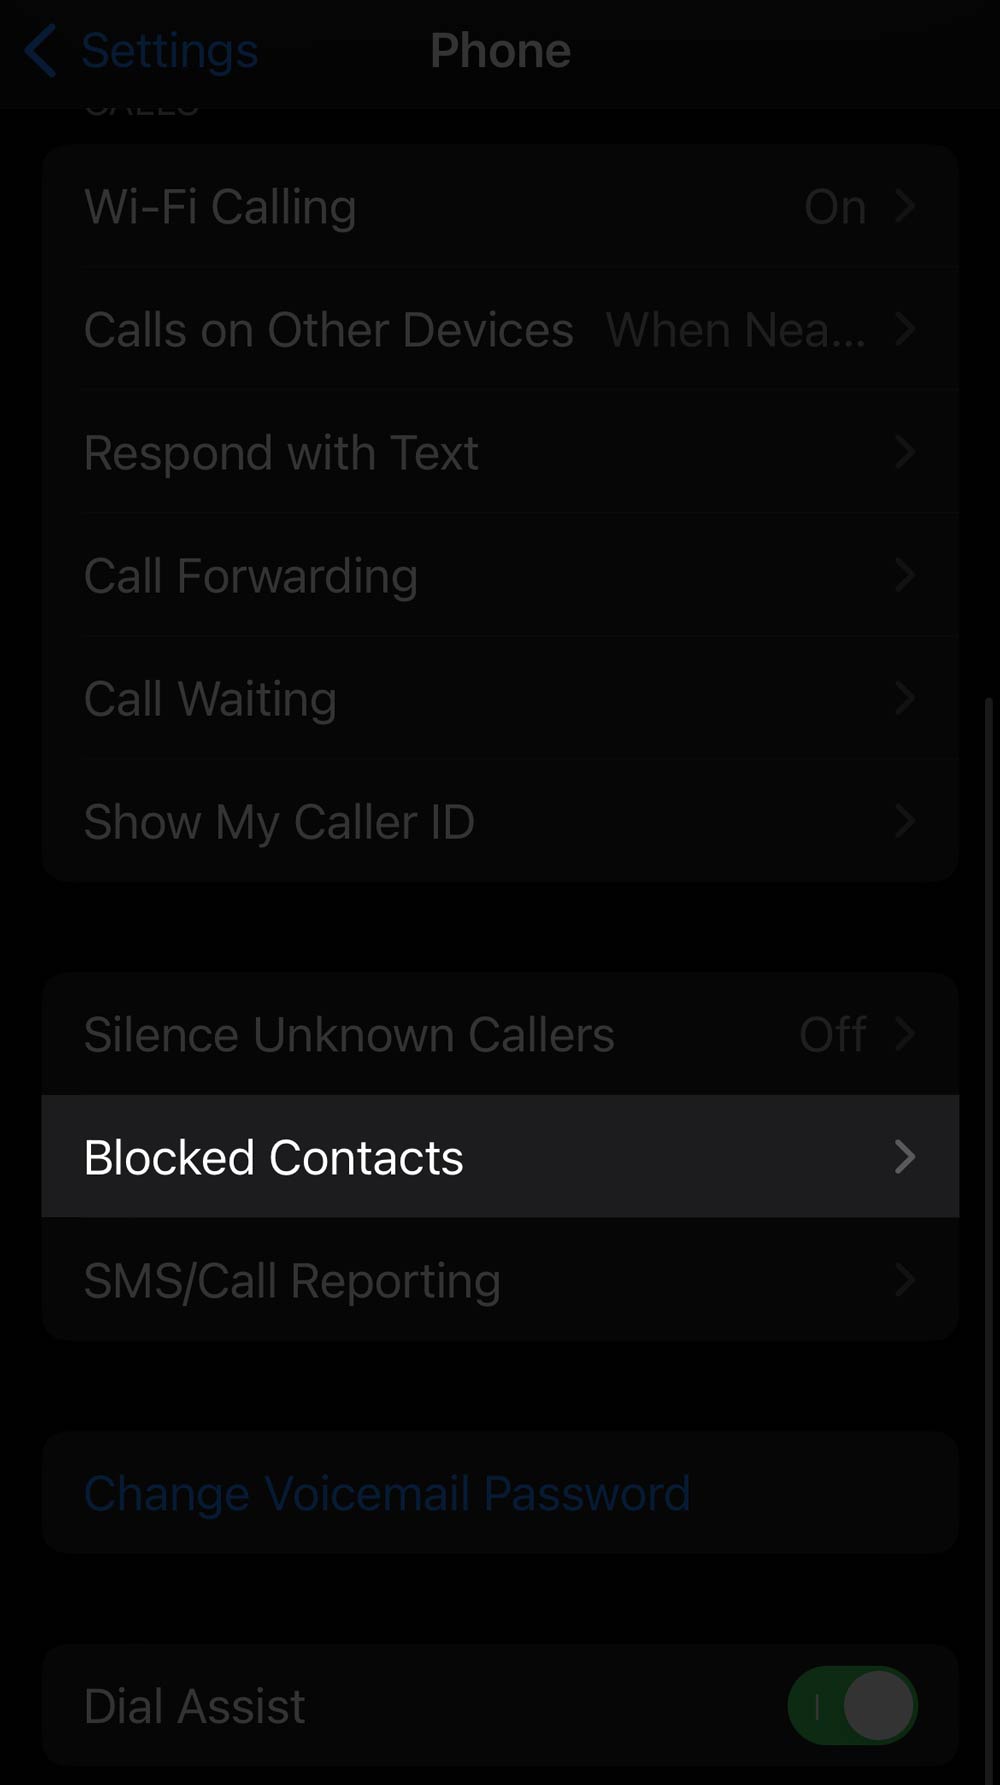 Tap on the Blocked Contacts option.